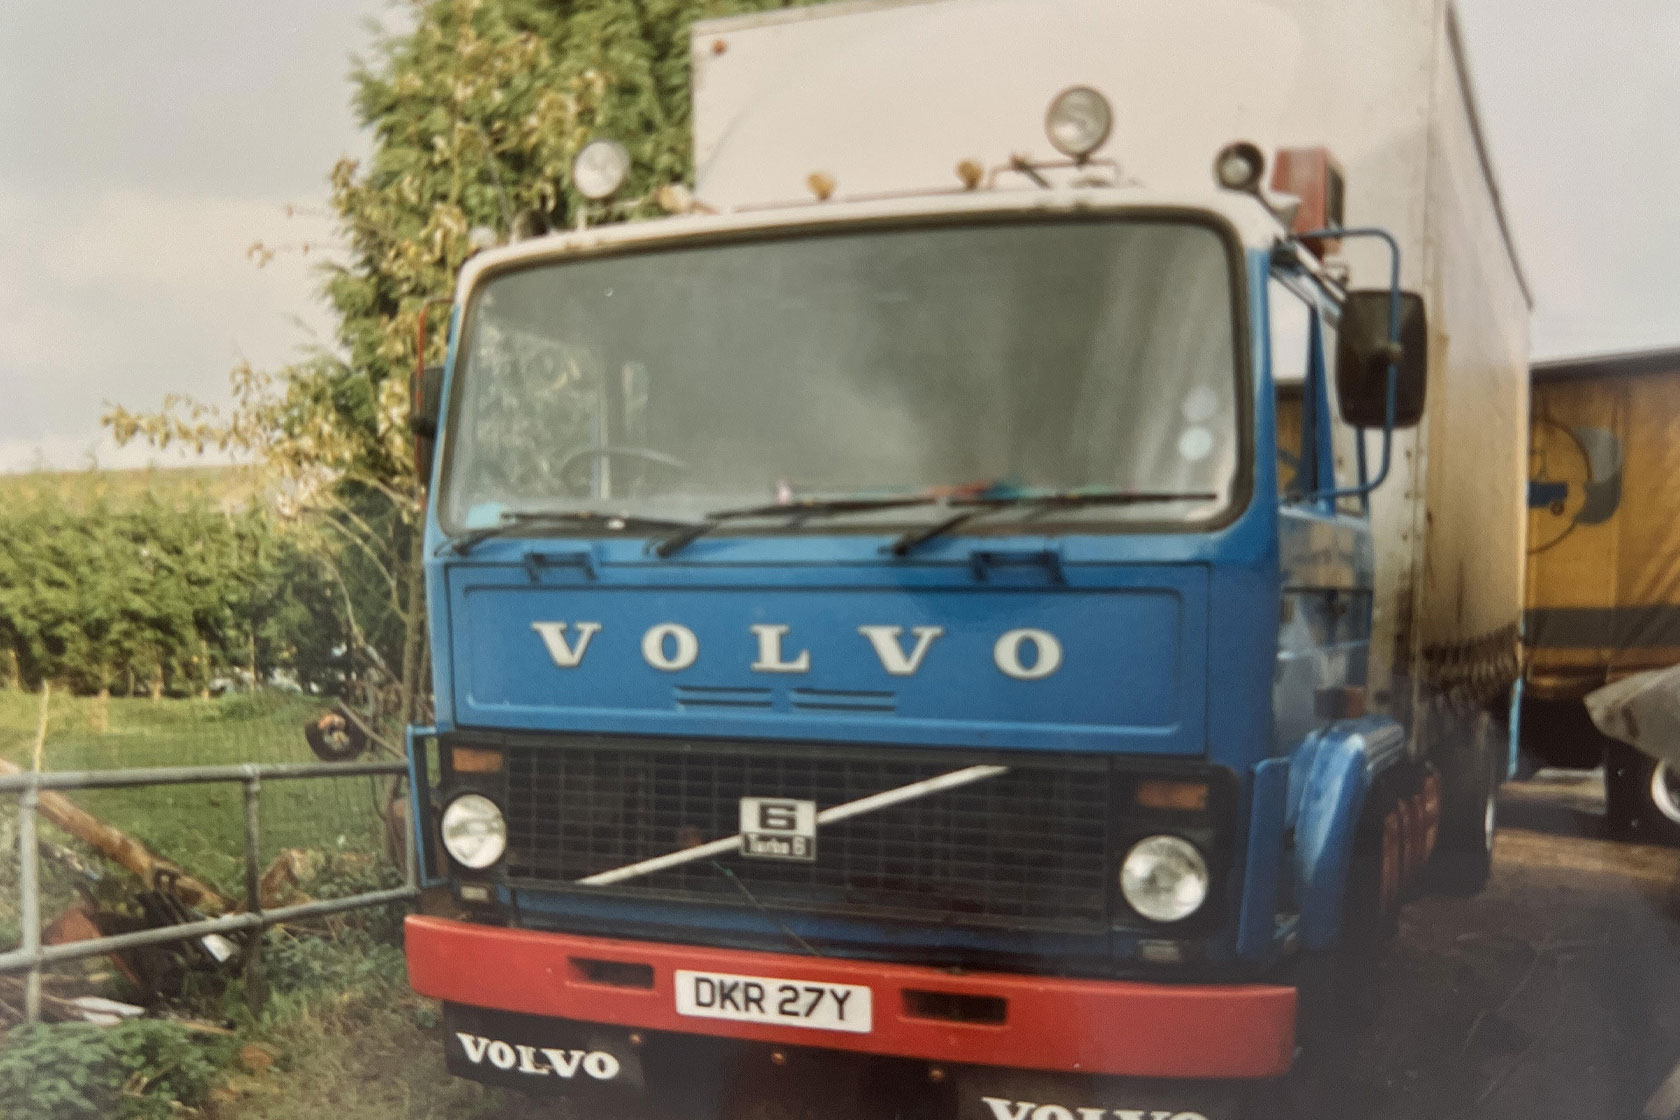 A old image of the first HGV used for sub contracting for various clients such as Bosmans, the HGV is a Volvo F7 16 Tonne Rigid